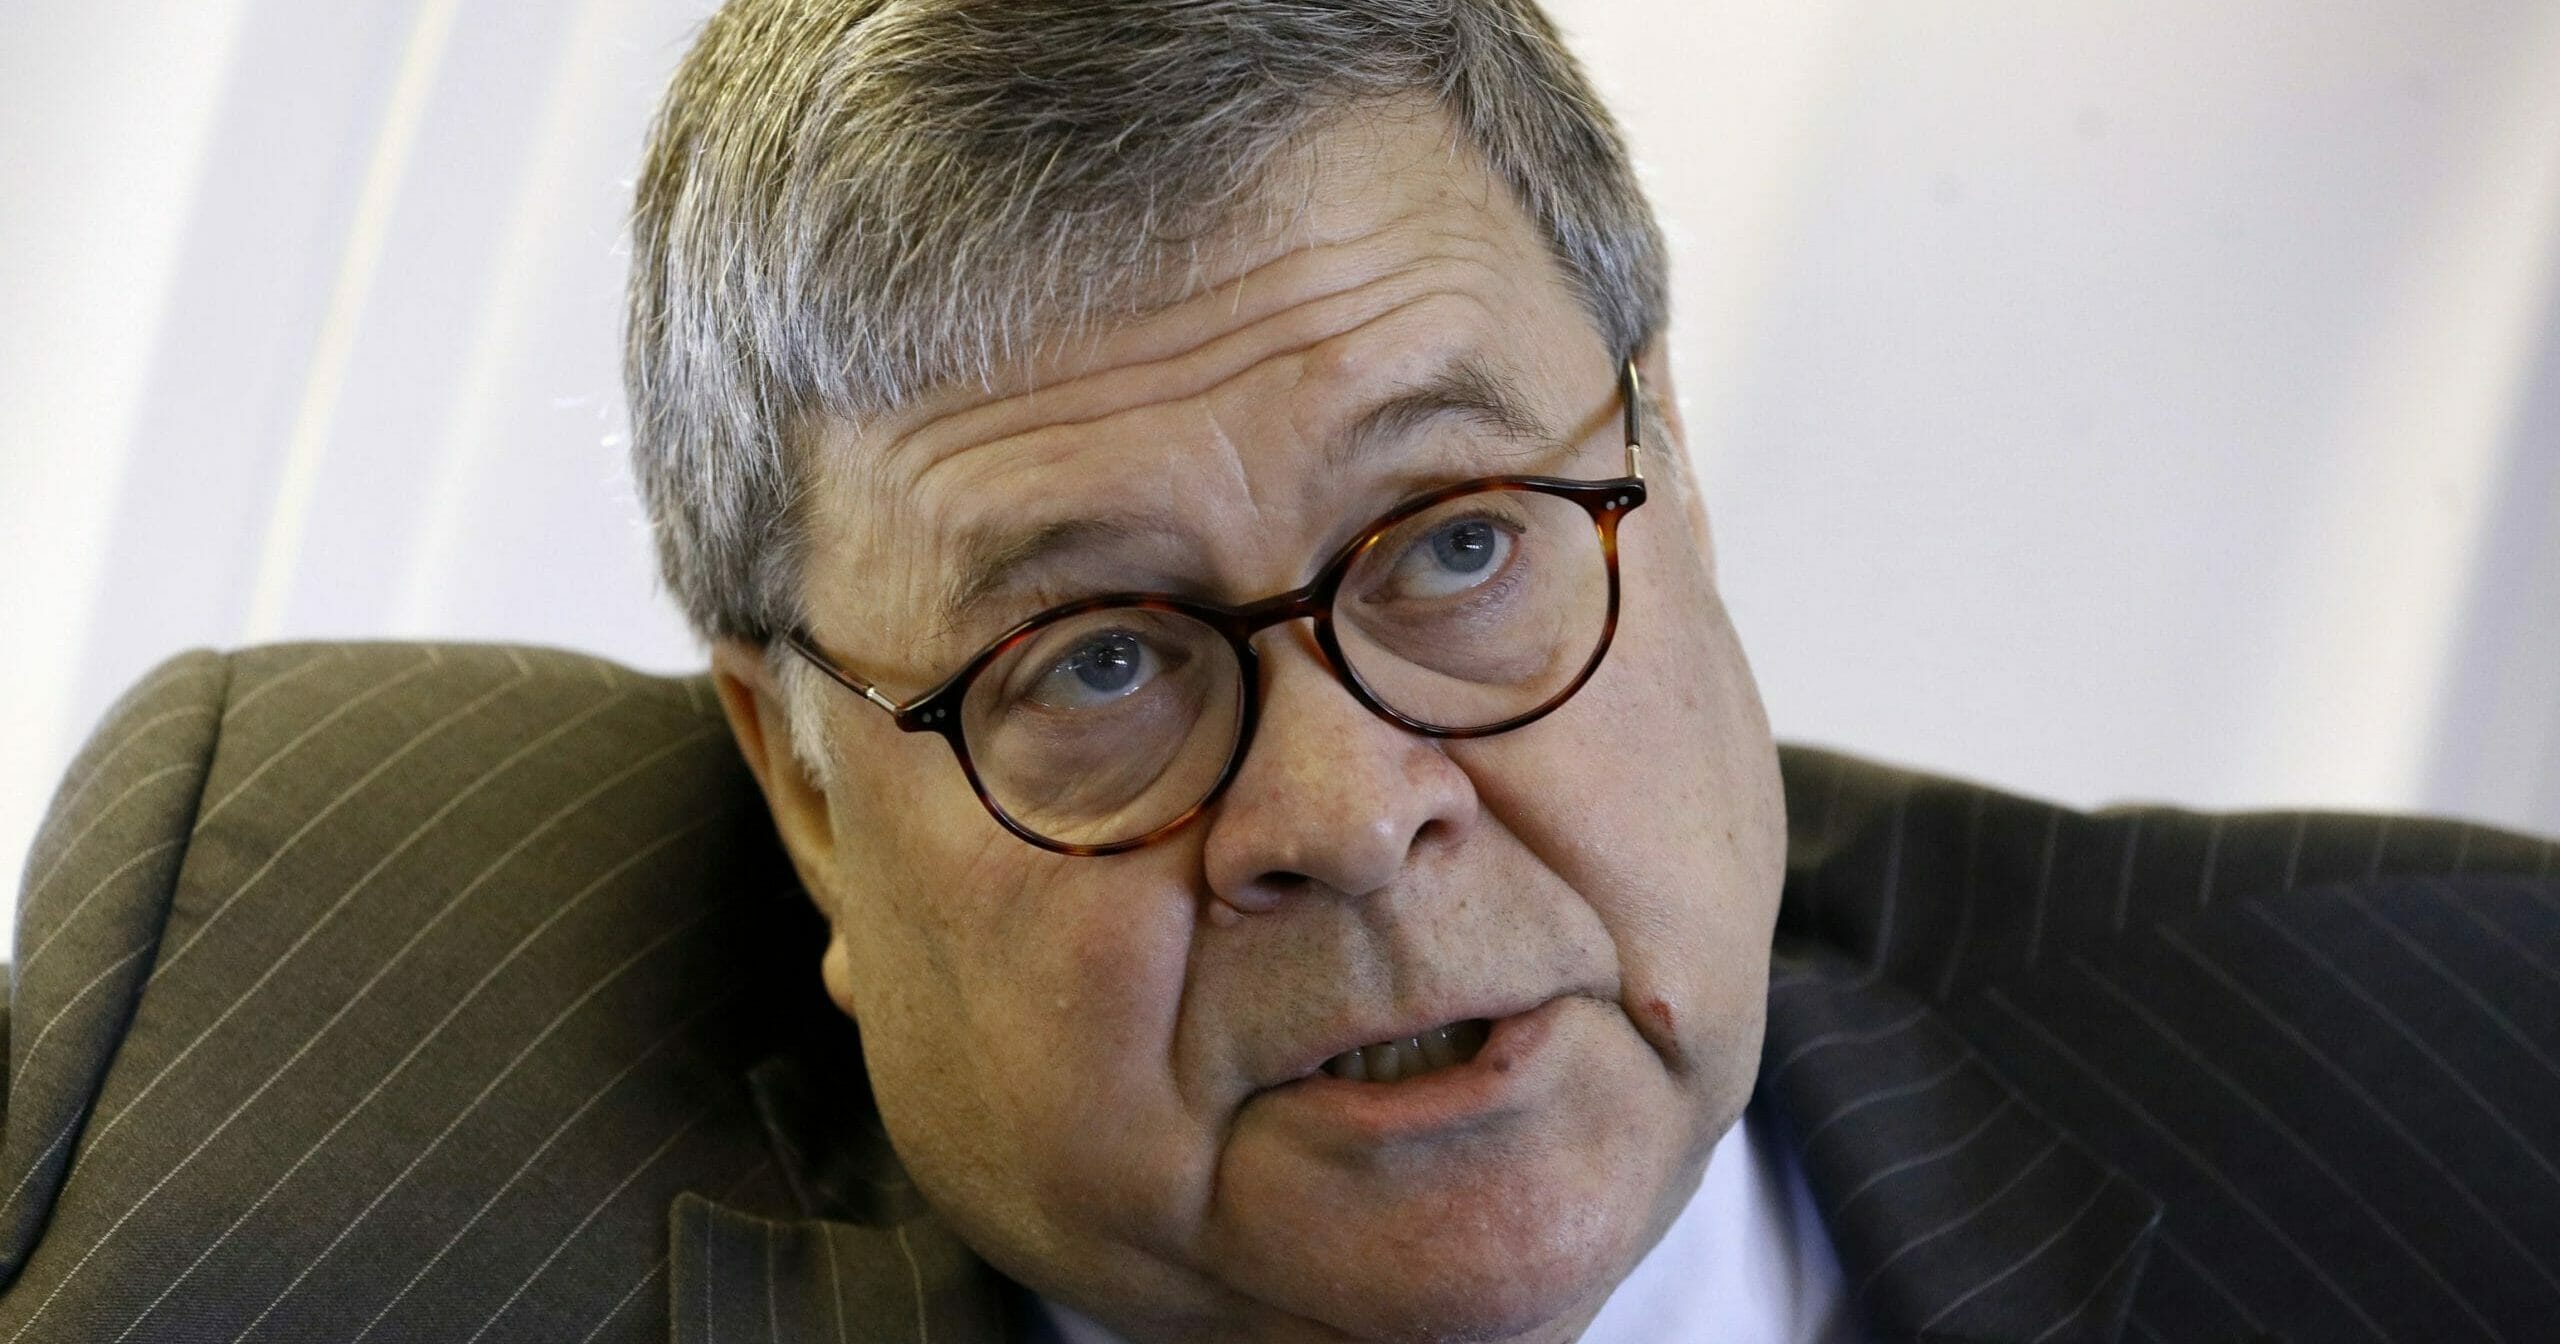 Attorney General William Barr speaks with an Associated Press reporter onboard an aircraft en route to Cleveland on Nov. 21, 2019, during a two-day trip to Ohio and Montana.